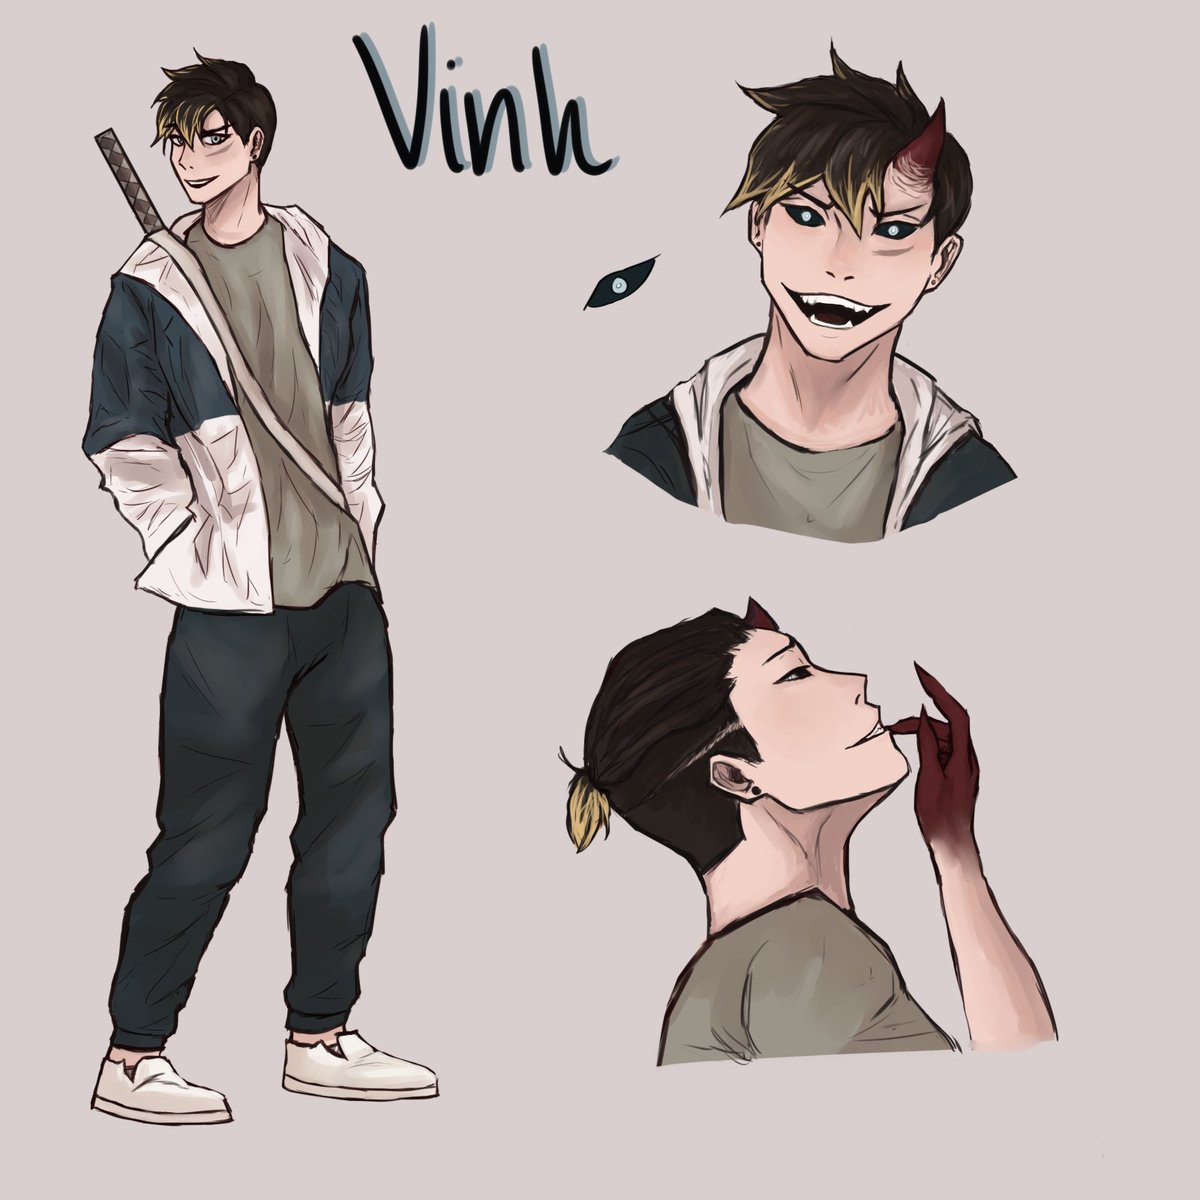 Introducing Mystery dude: Vinh! He's the guy in the last page of the recent comic of Q's past, he's a lazy butt. His name means "glory" in Vietnamese :)
#originalcharacter #ocs 